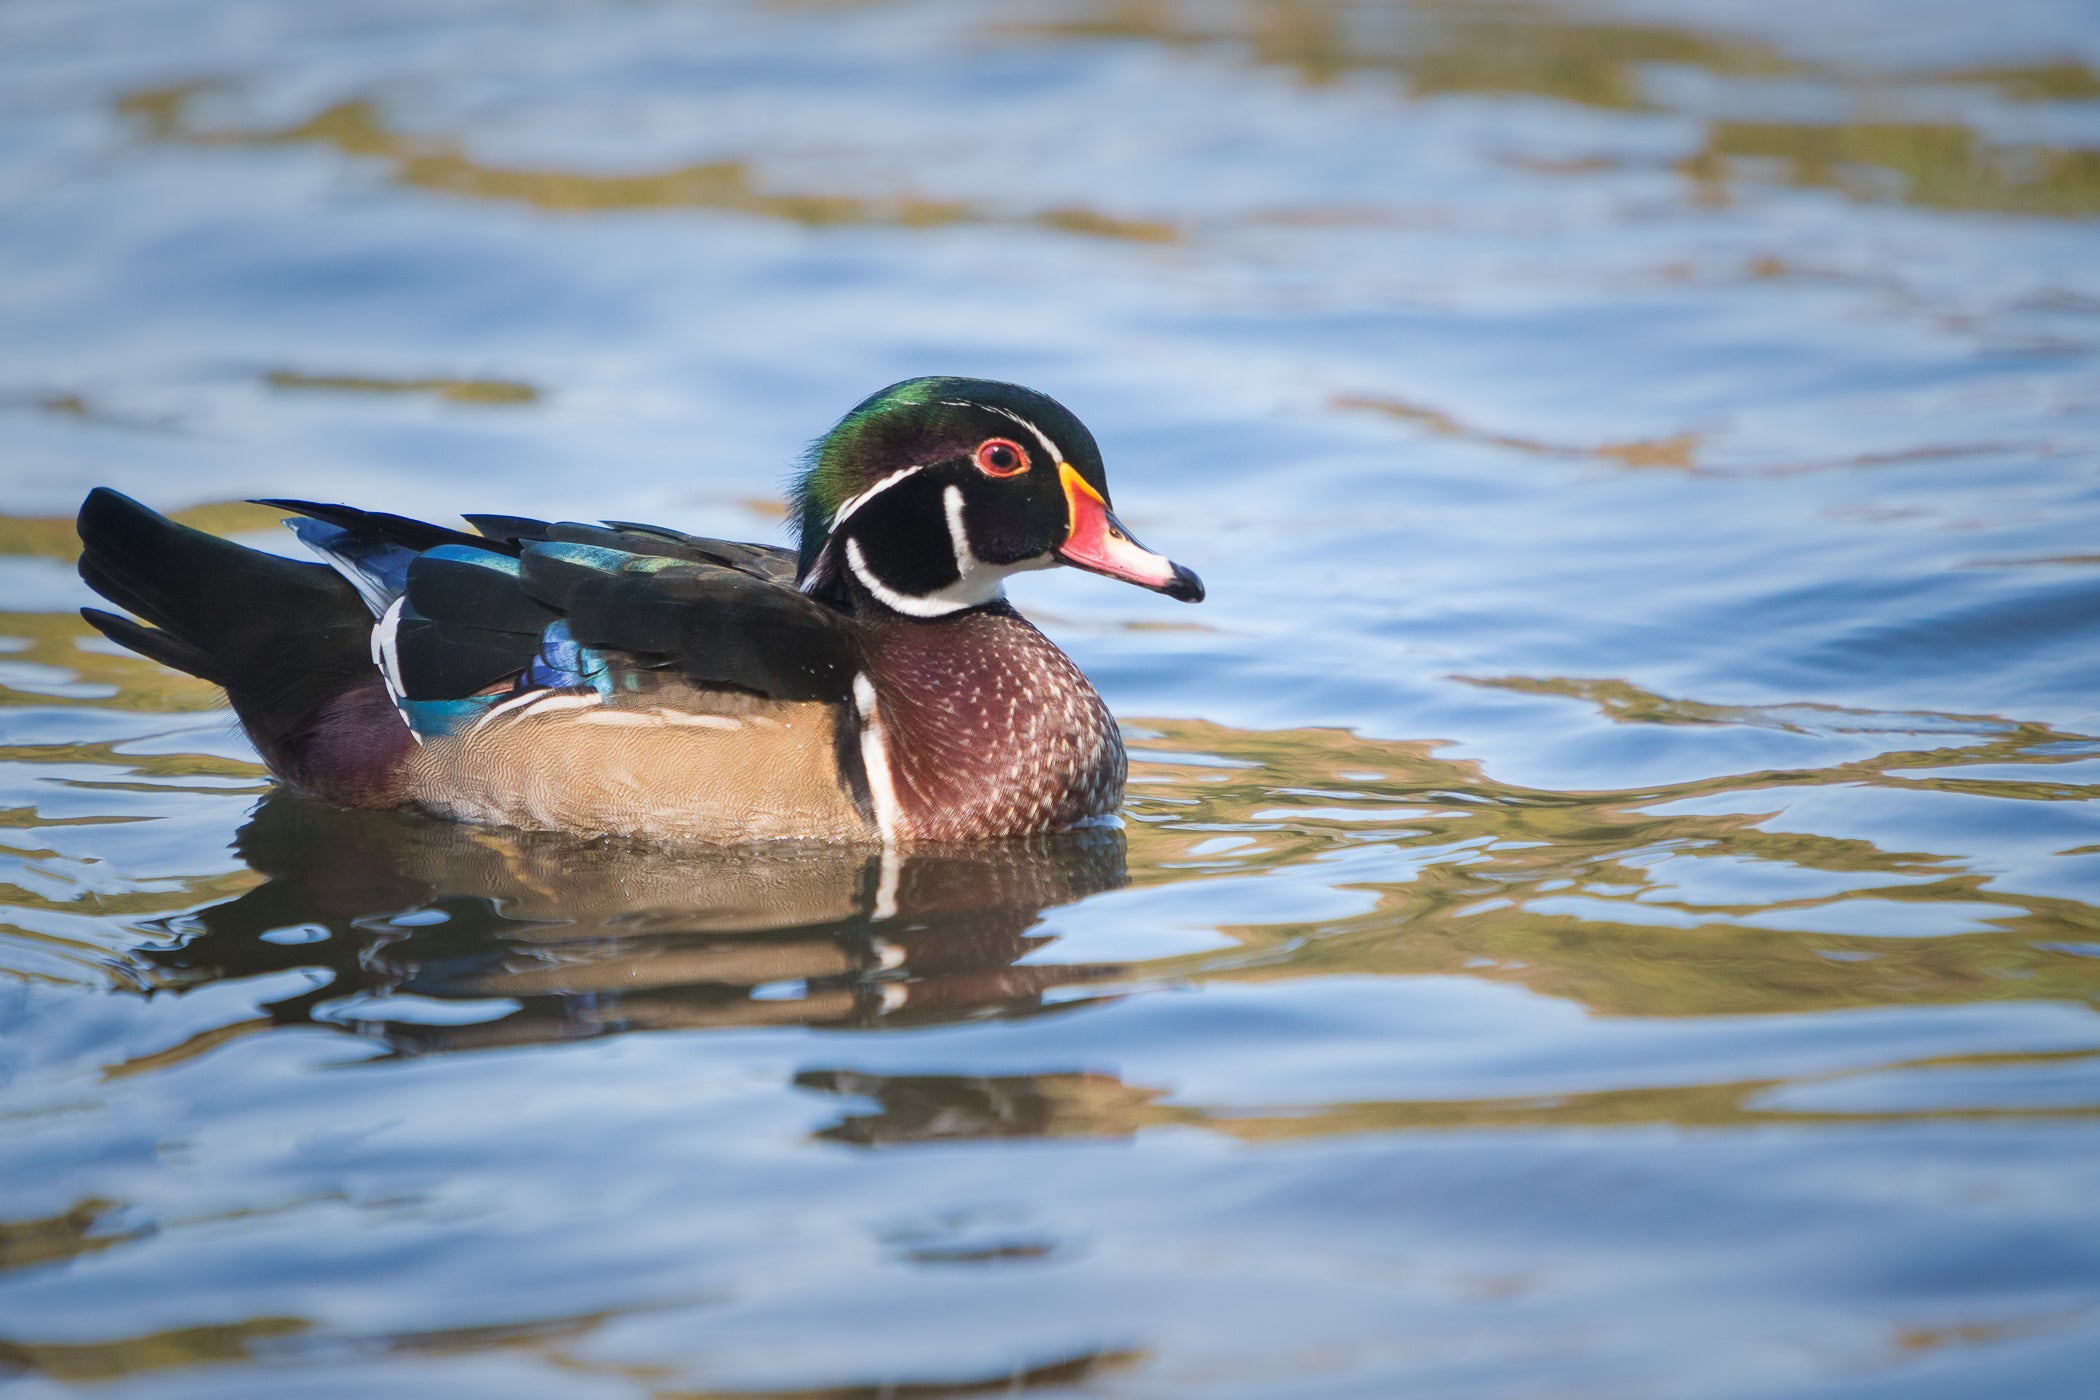 Fins, Feathers and Flowers attendees are likely to see a wide variety shorebirds and waterfowl including resident wood ducks. 